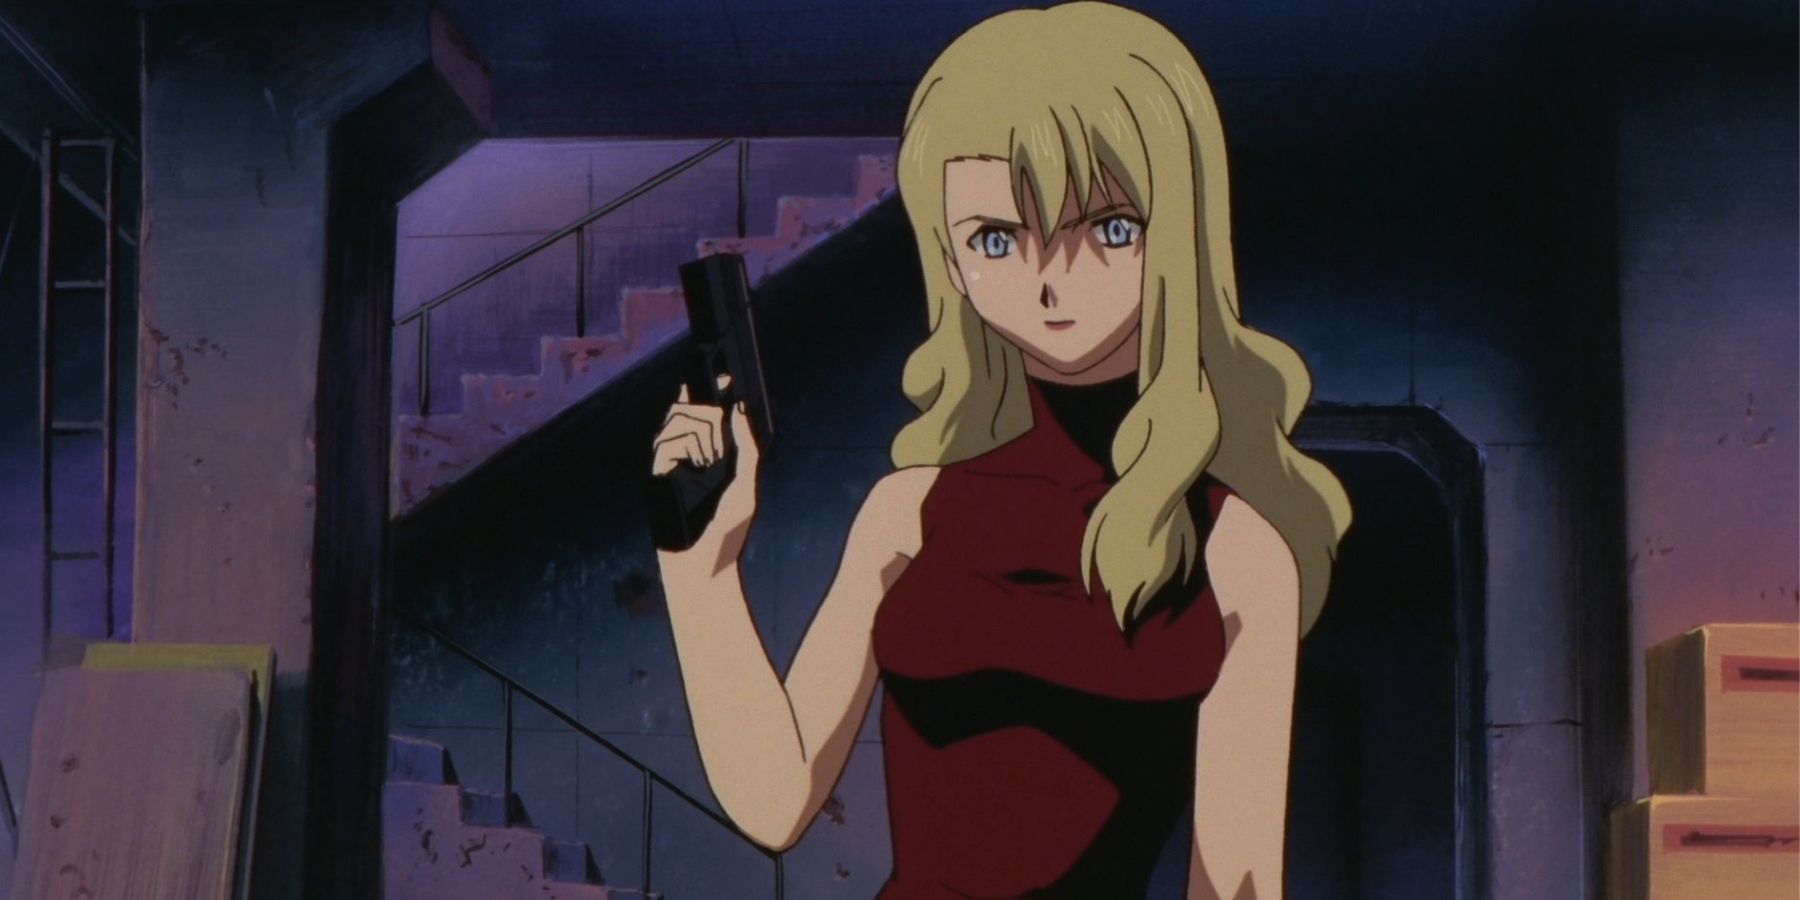 The 20 Greatest Femme Fatale Anime Characters (Ranked 2019)